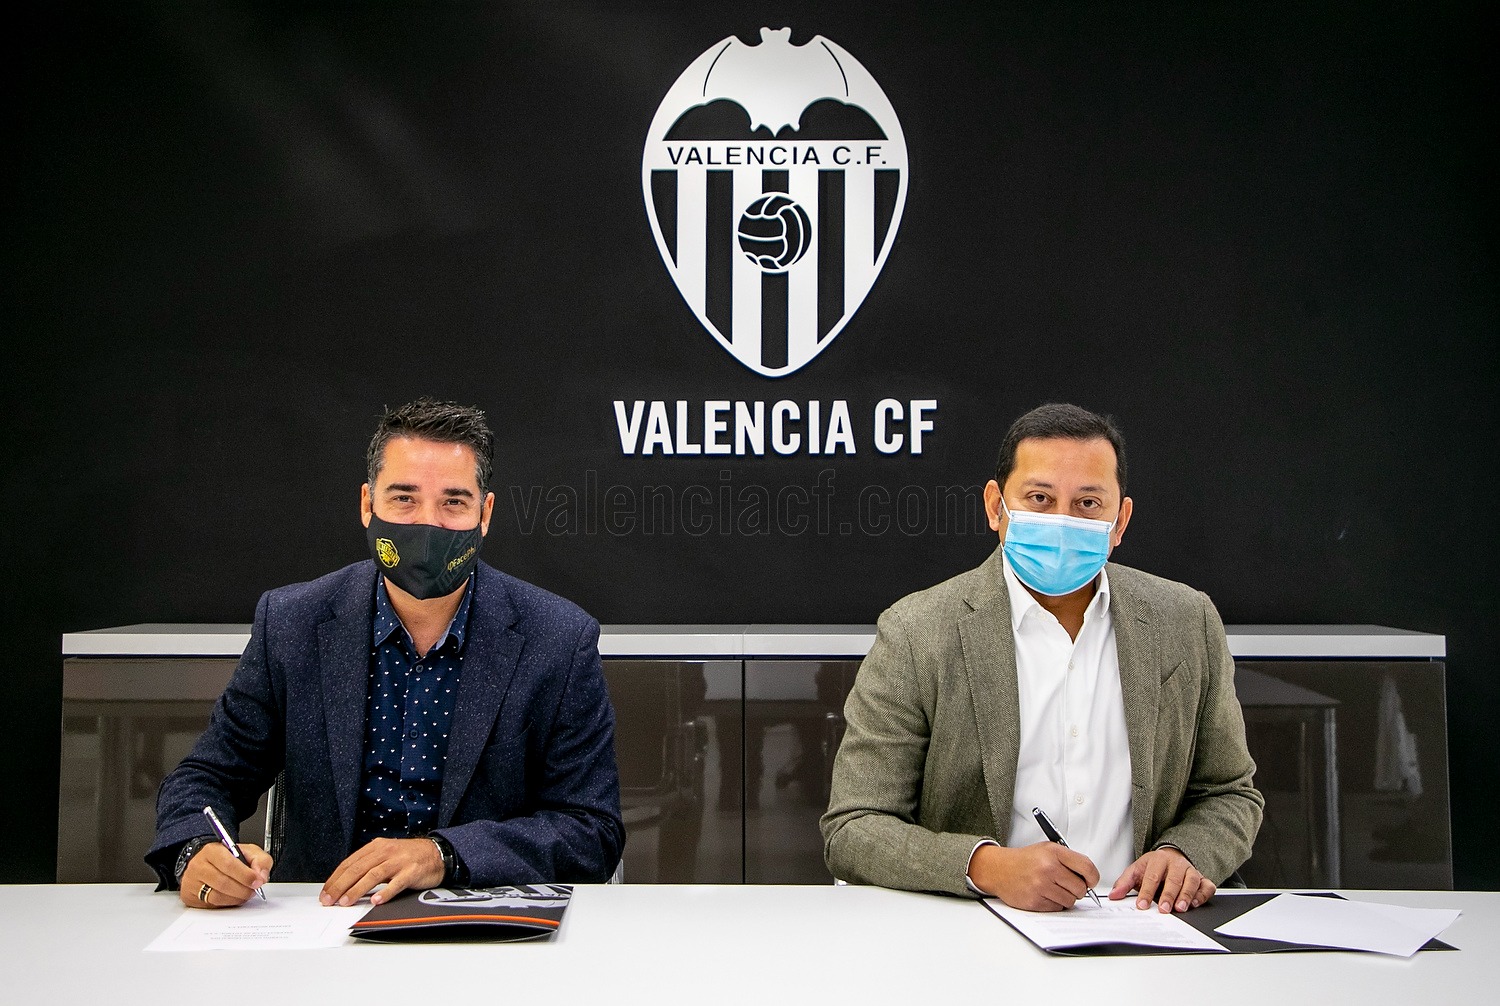 FacePhi and Valencia FC signing